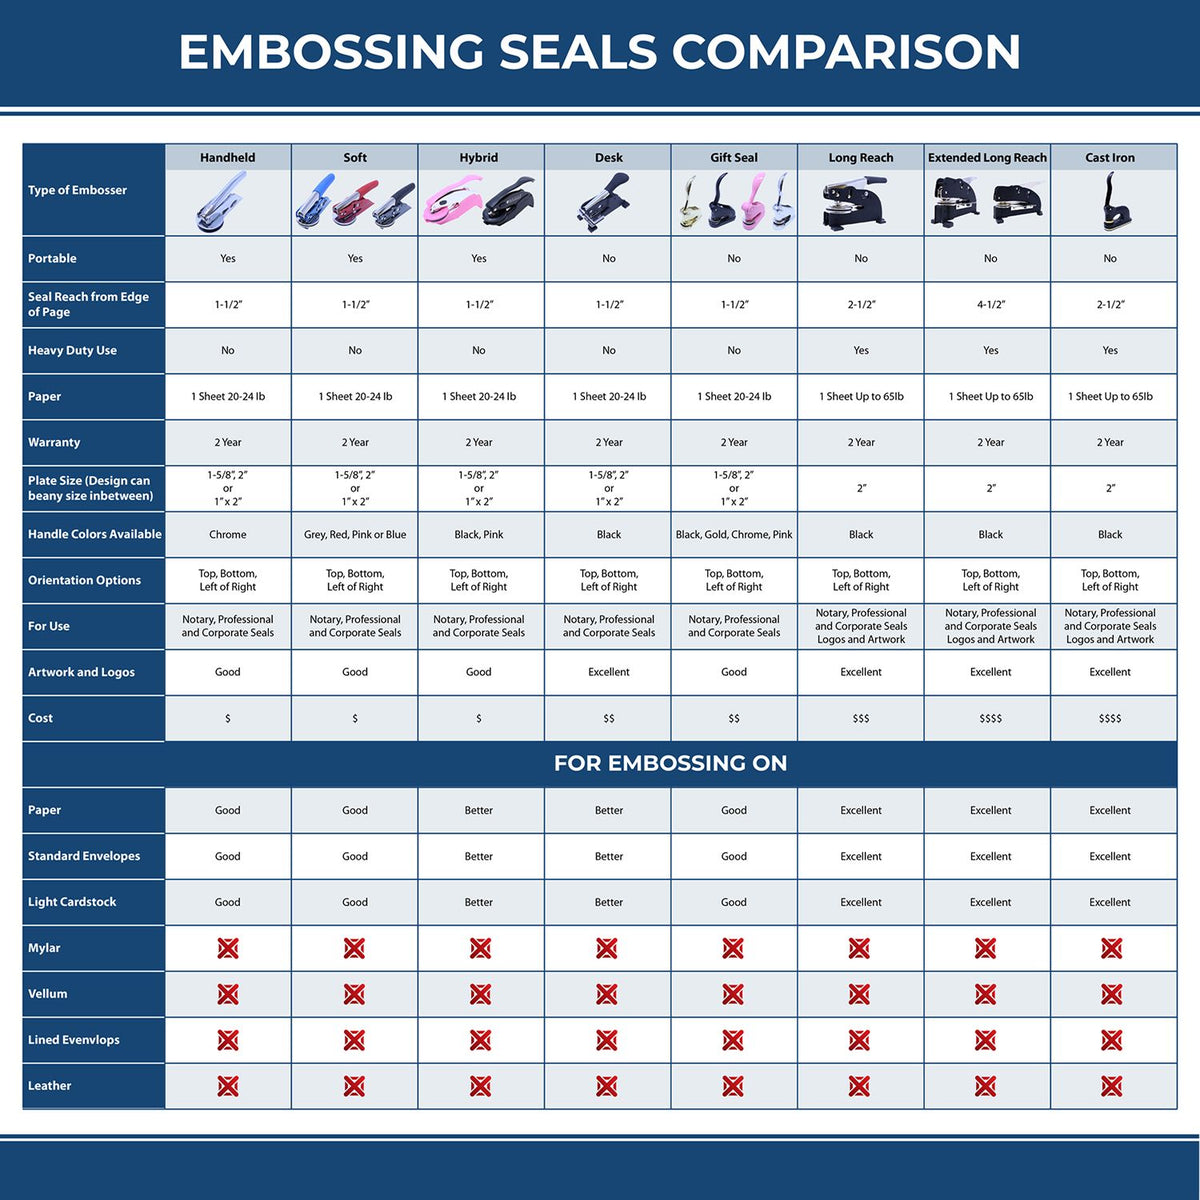 A comparison chart for the different types of mount models available for the Handheld Maine Architect Seal Embosser.